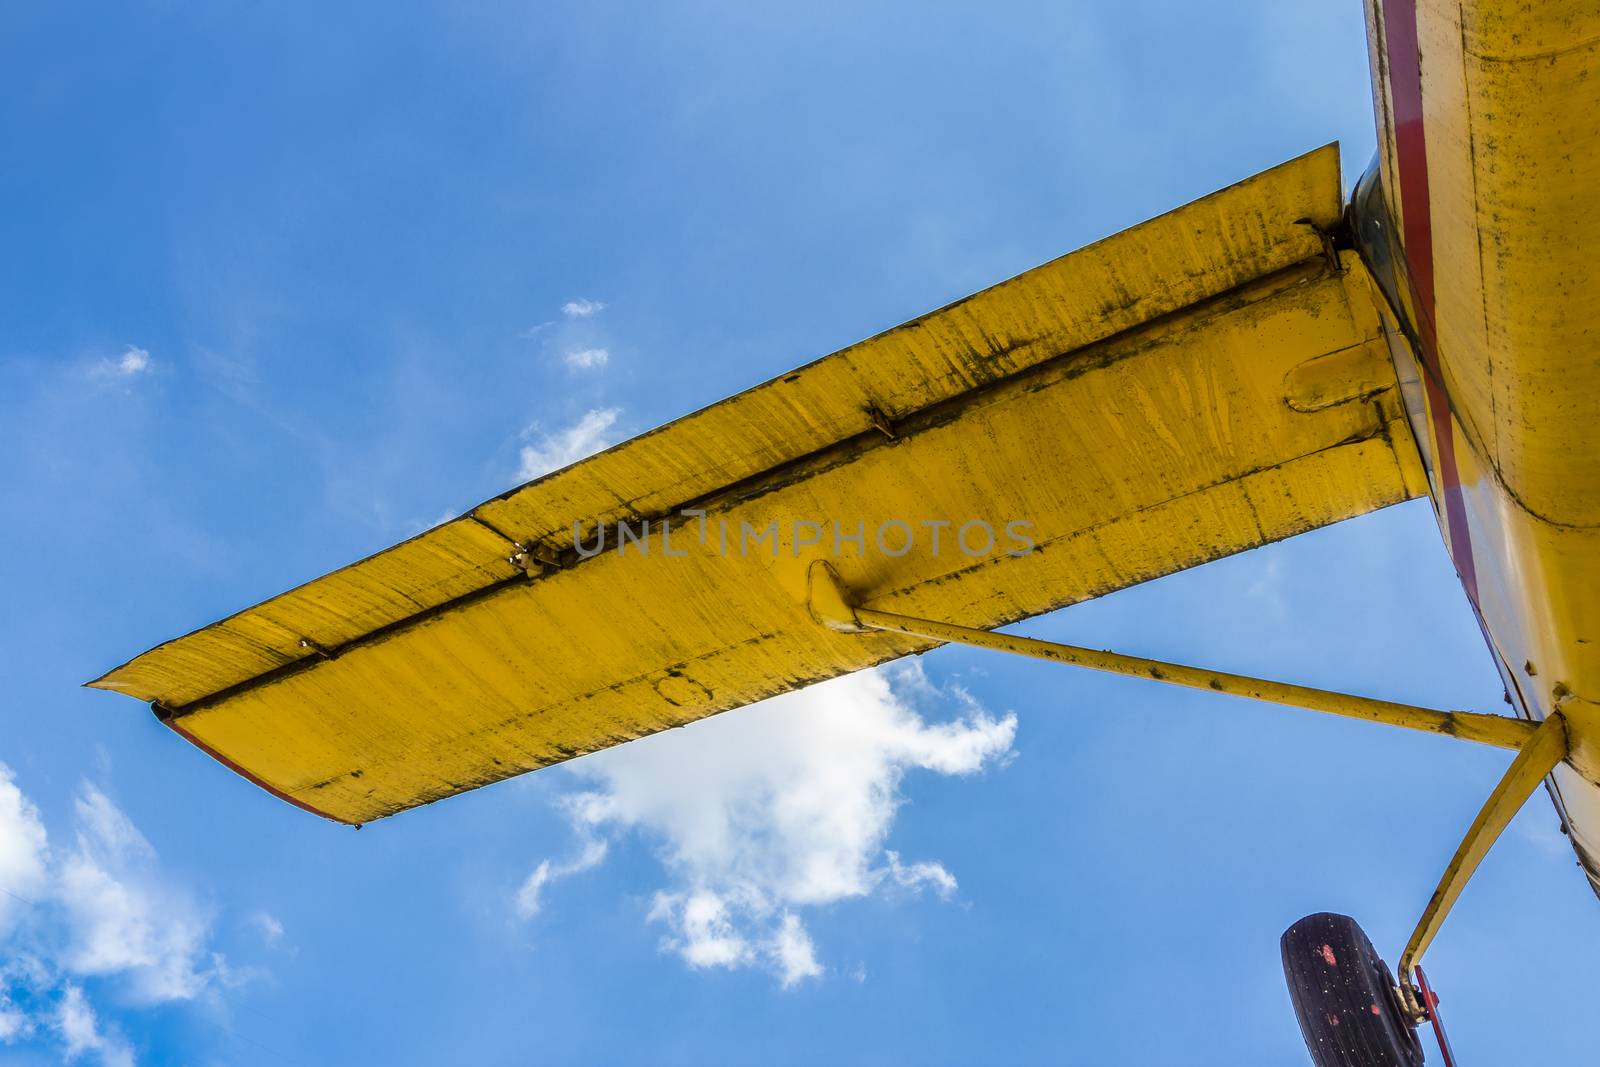 Vintage airplane seen from below, with blue sky in the background